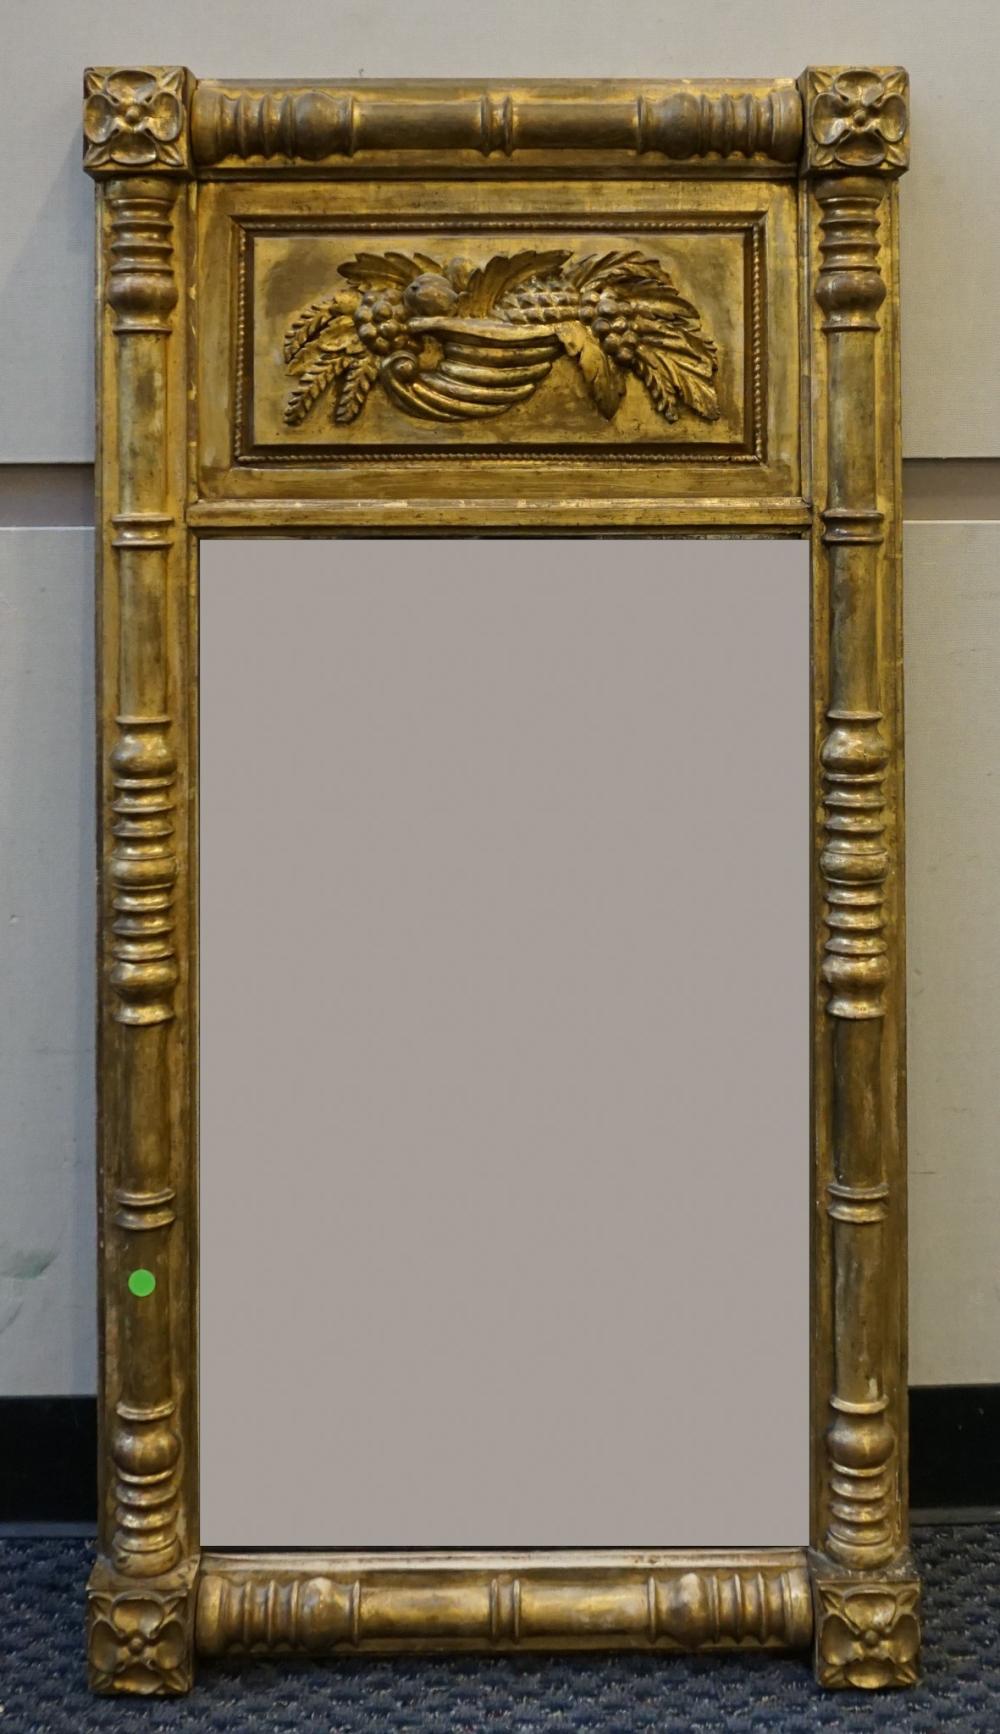 CLASSICAL STYLE PARCEL GILT DECORATED